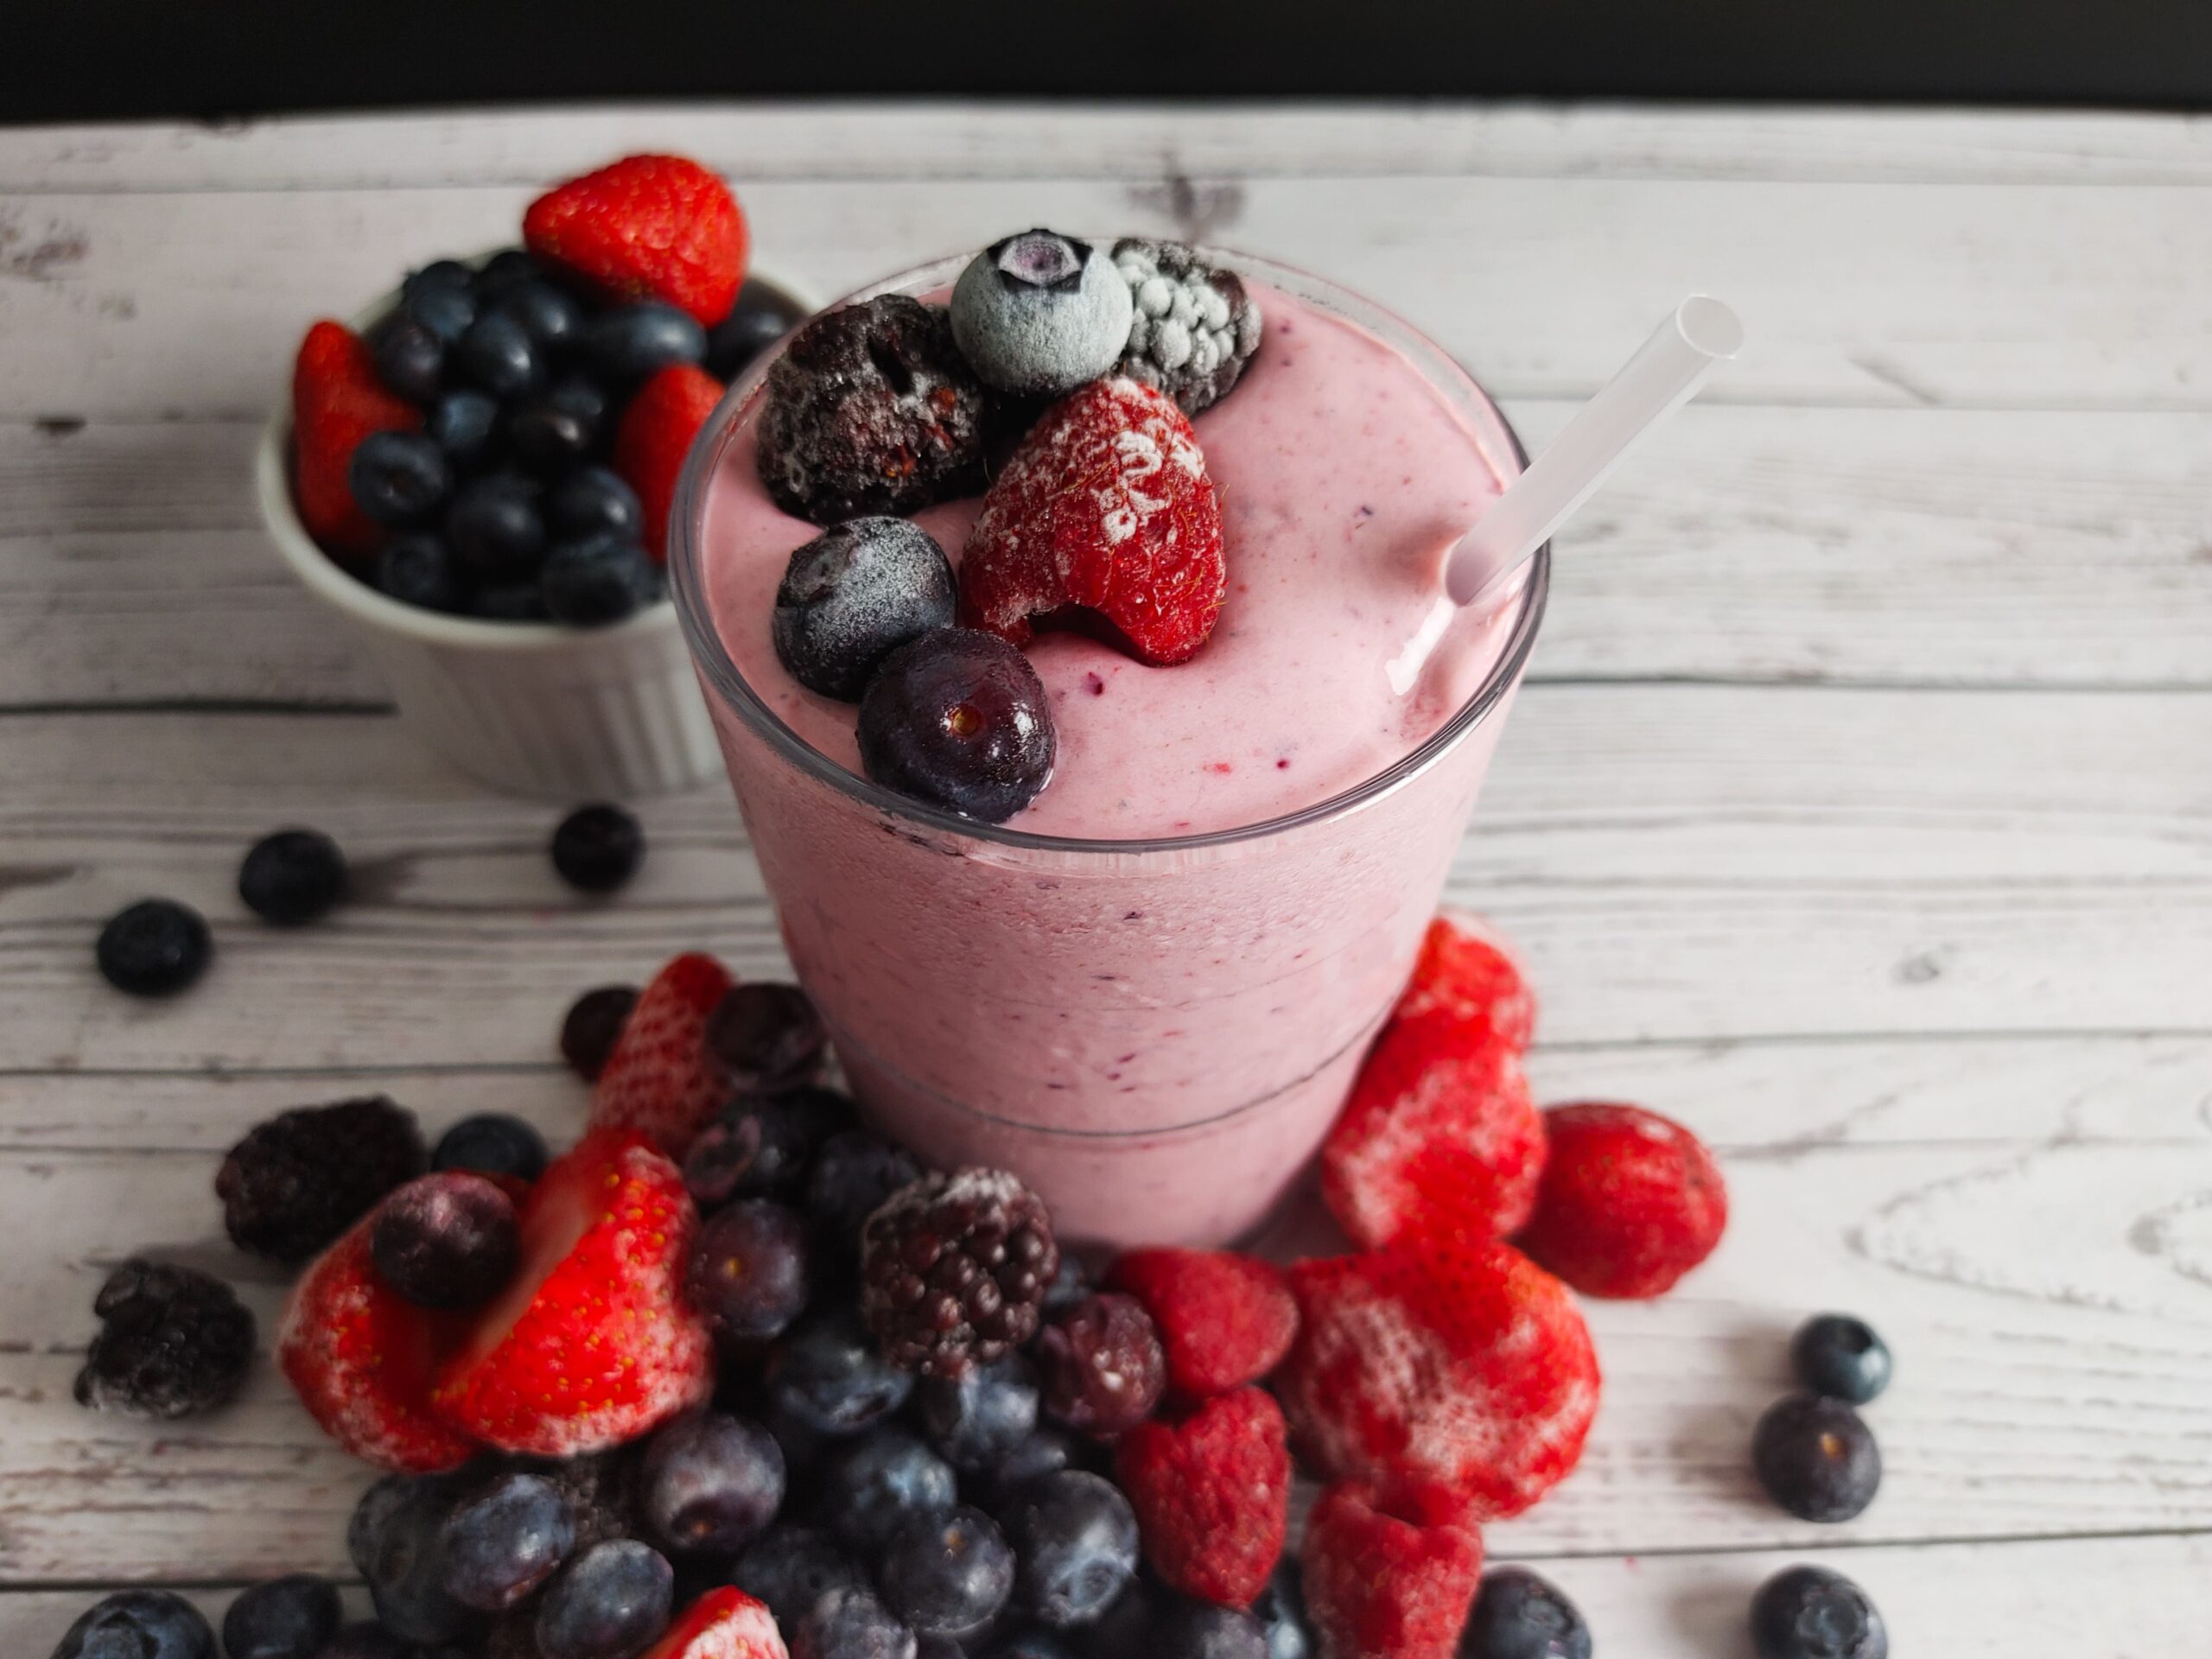 Refresh with a Quadruple Berry Breeze Smoothie